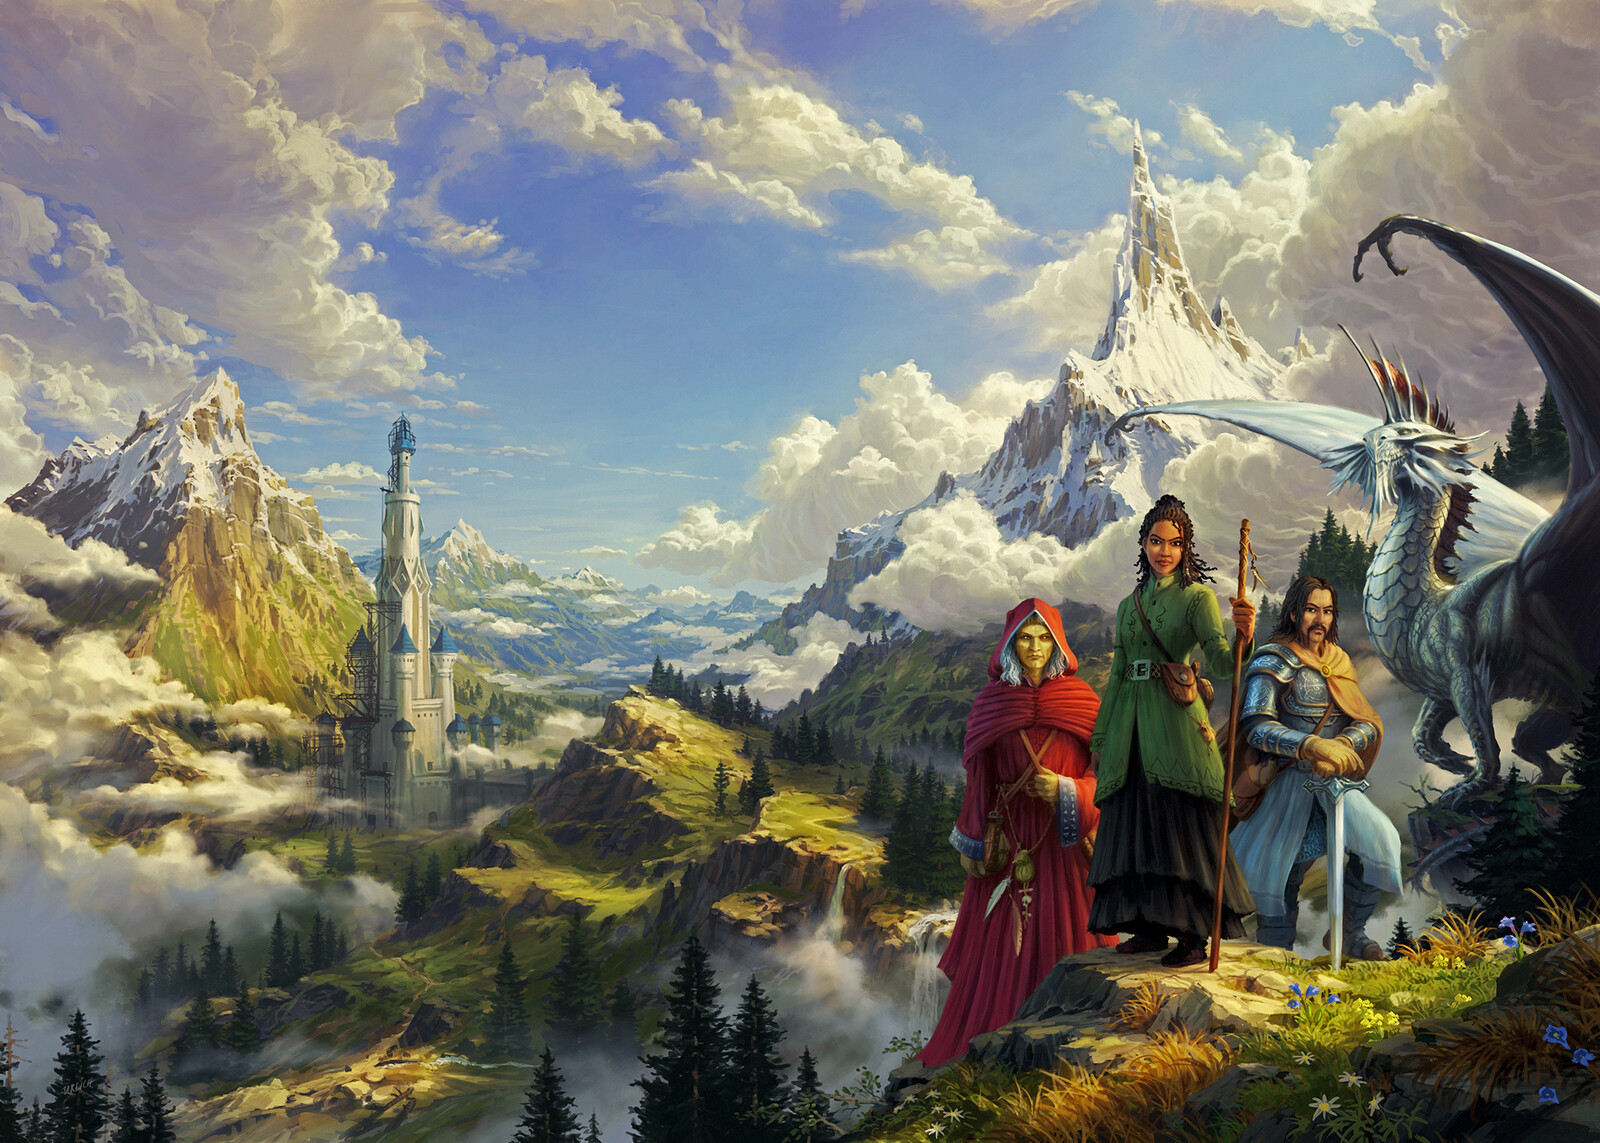 Dragonlance: Dragons of Fate